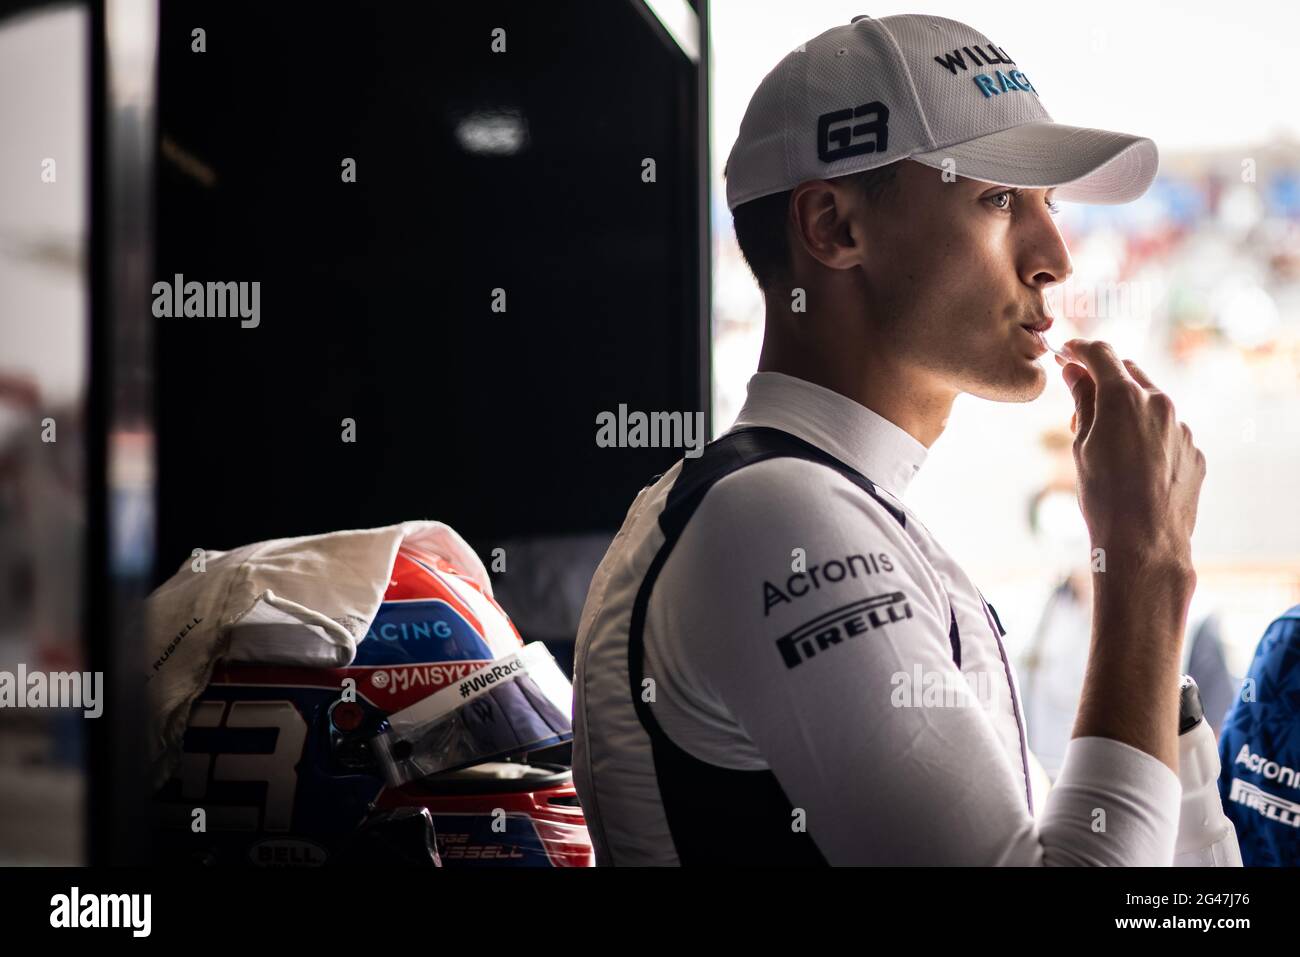 George Russell (GBR) Williams Racing. French Grand Prix, Saturday 19th June 2021. Paul Ricard, France. Stock Photo